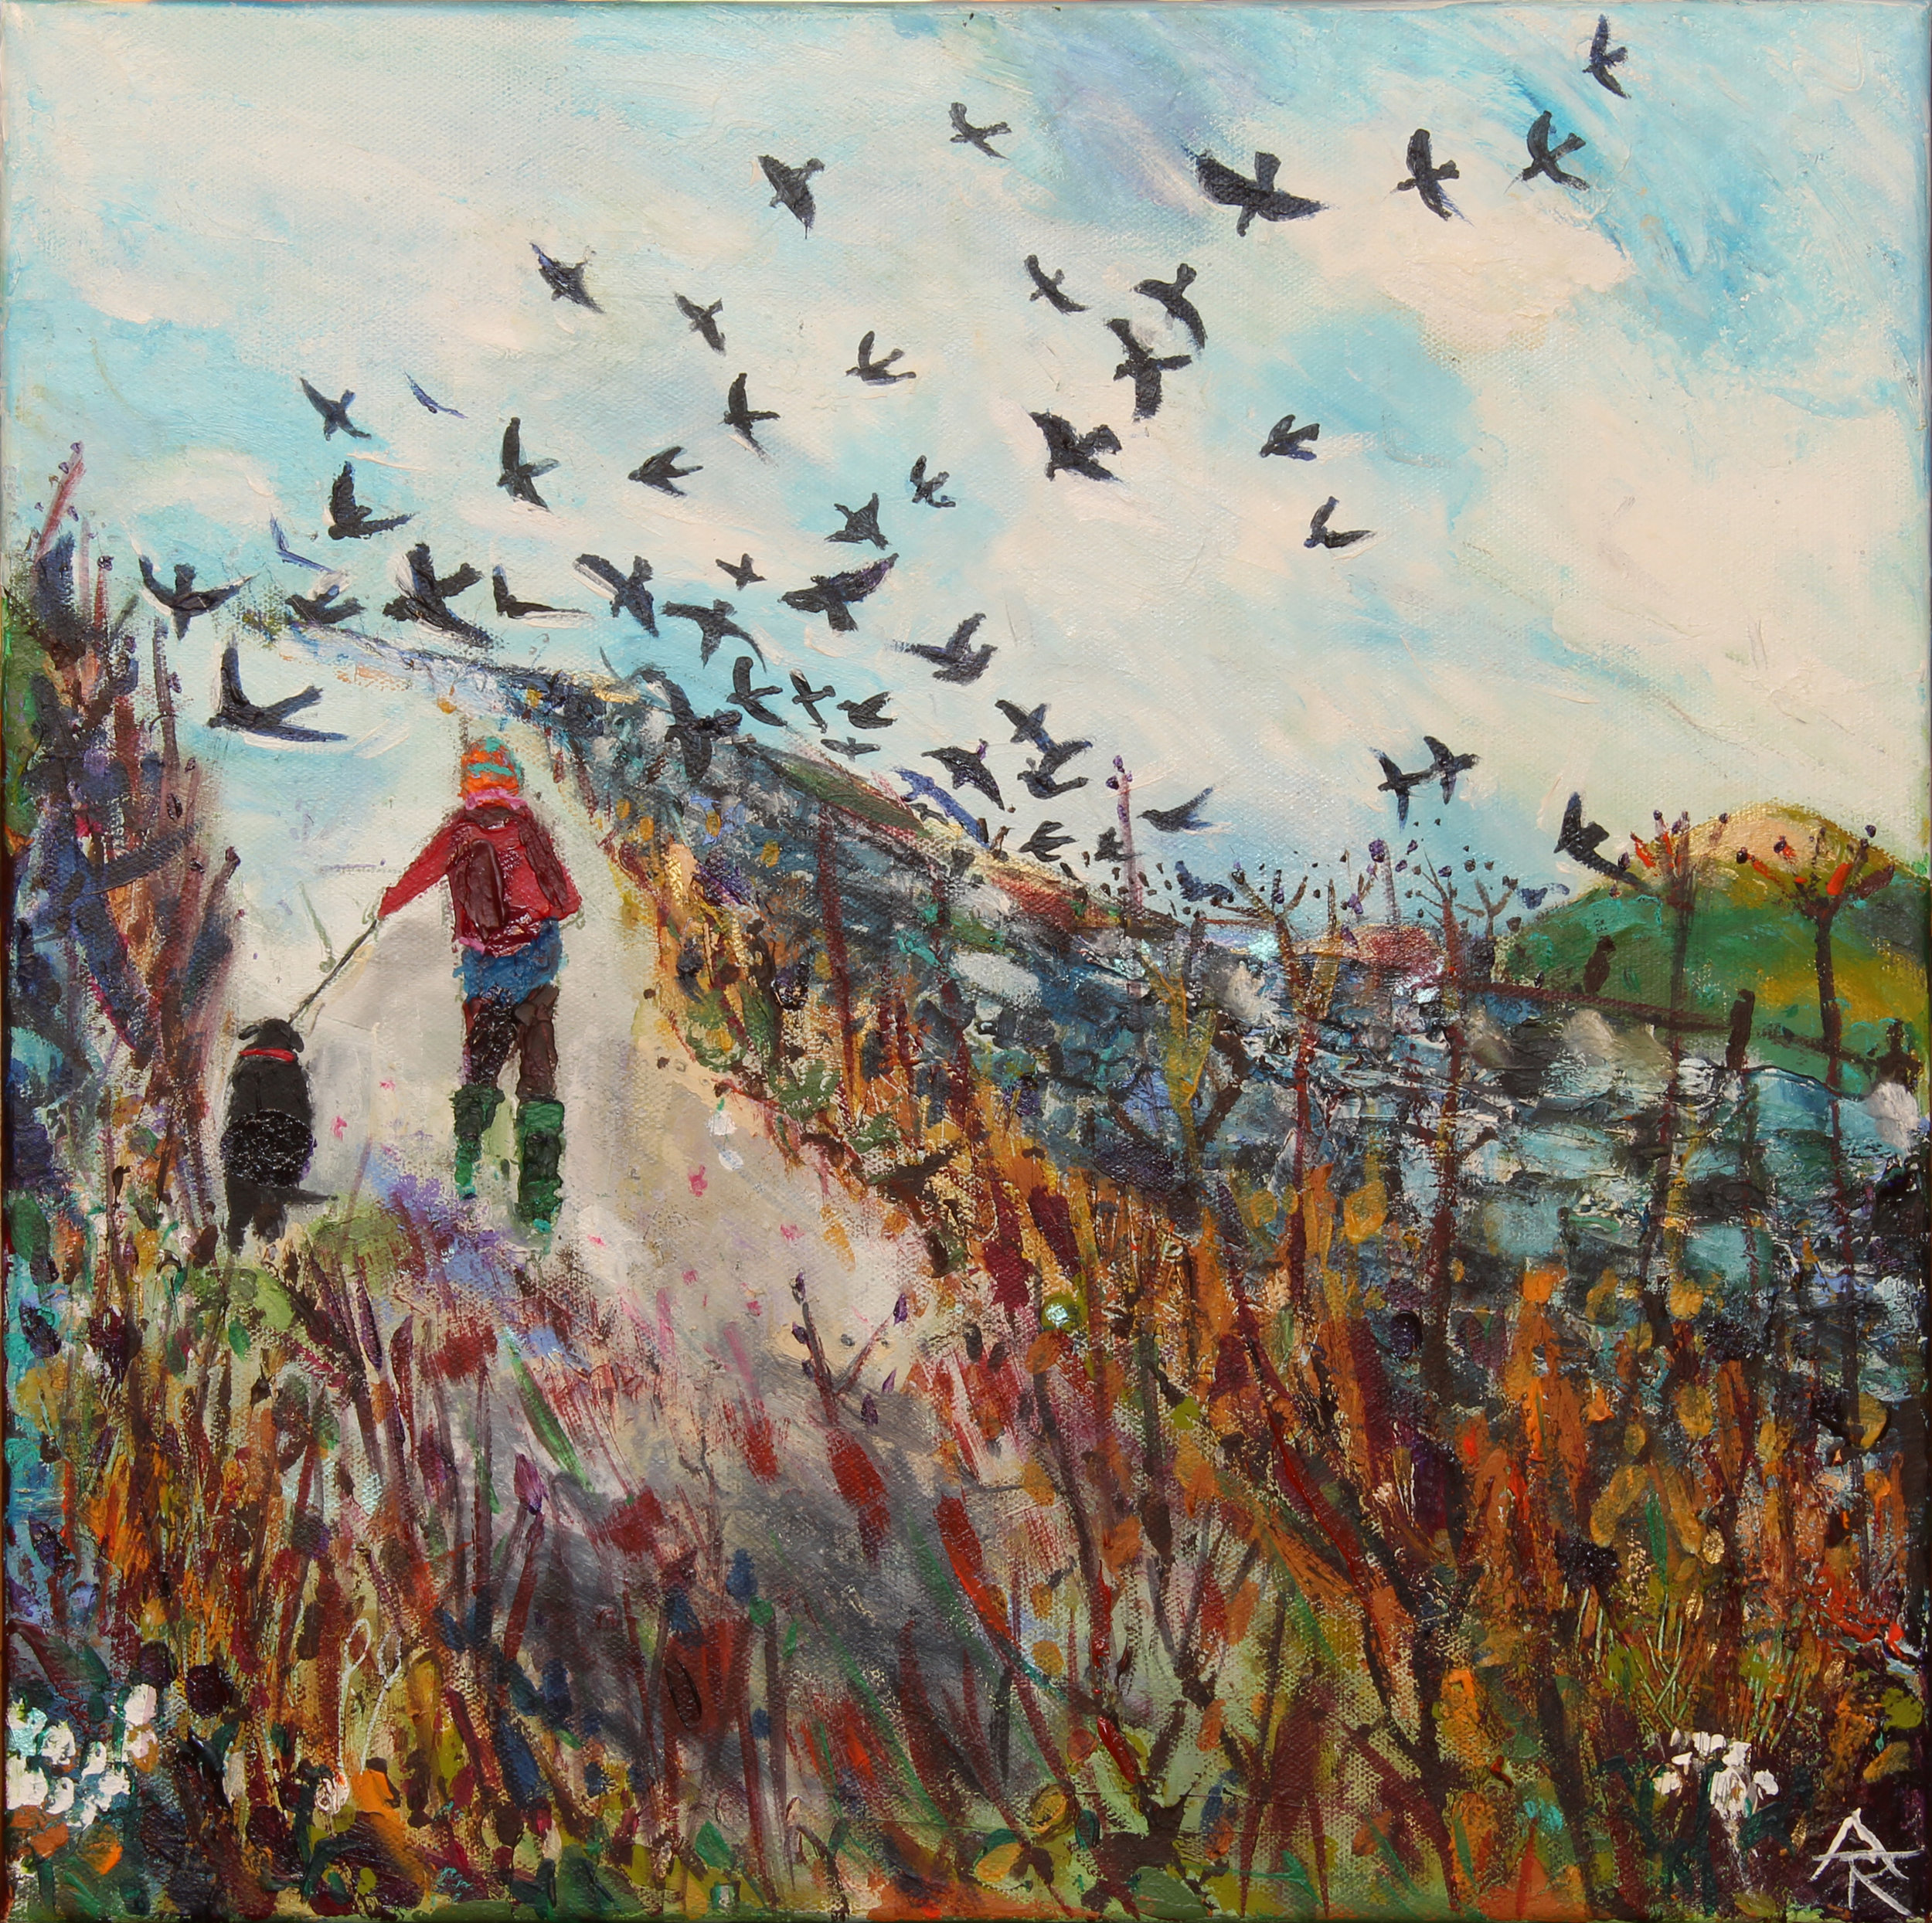 From Over The Wall The Starlings Swooped, acrylic on canvas, 46 x 46 cm, SOLD